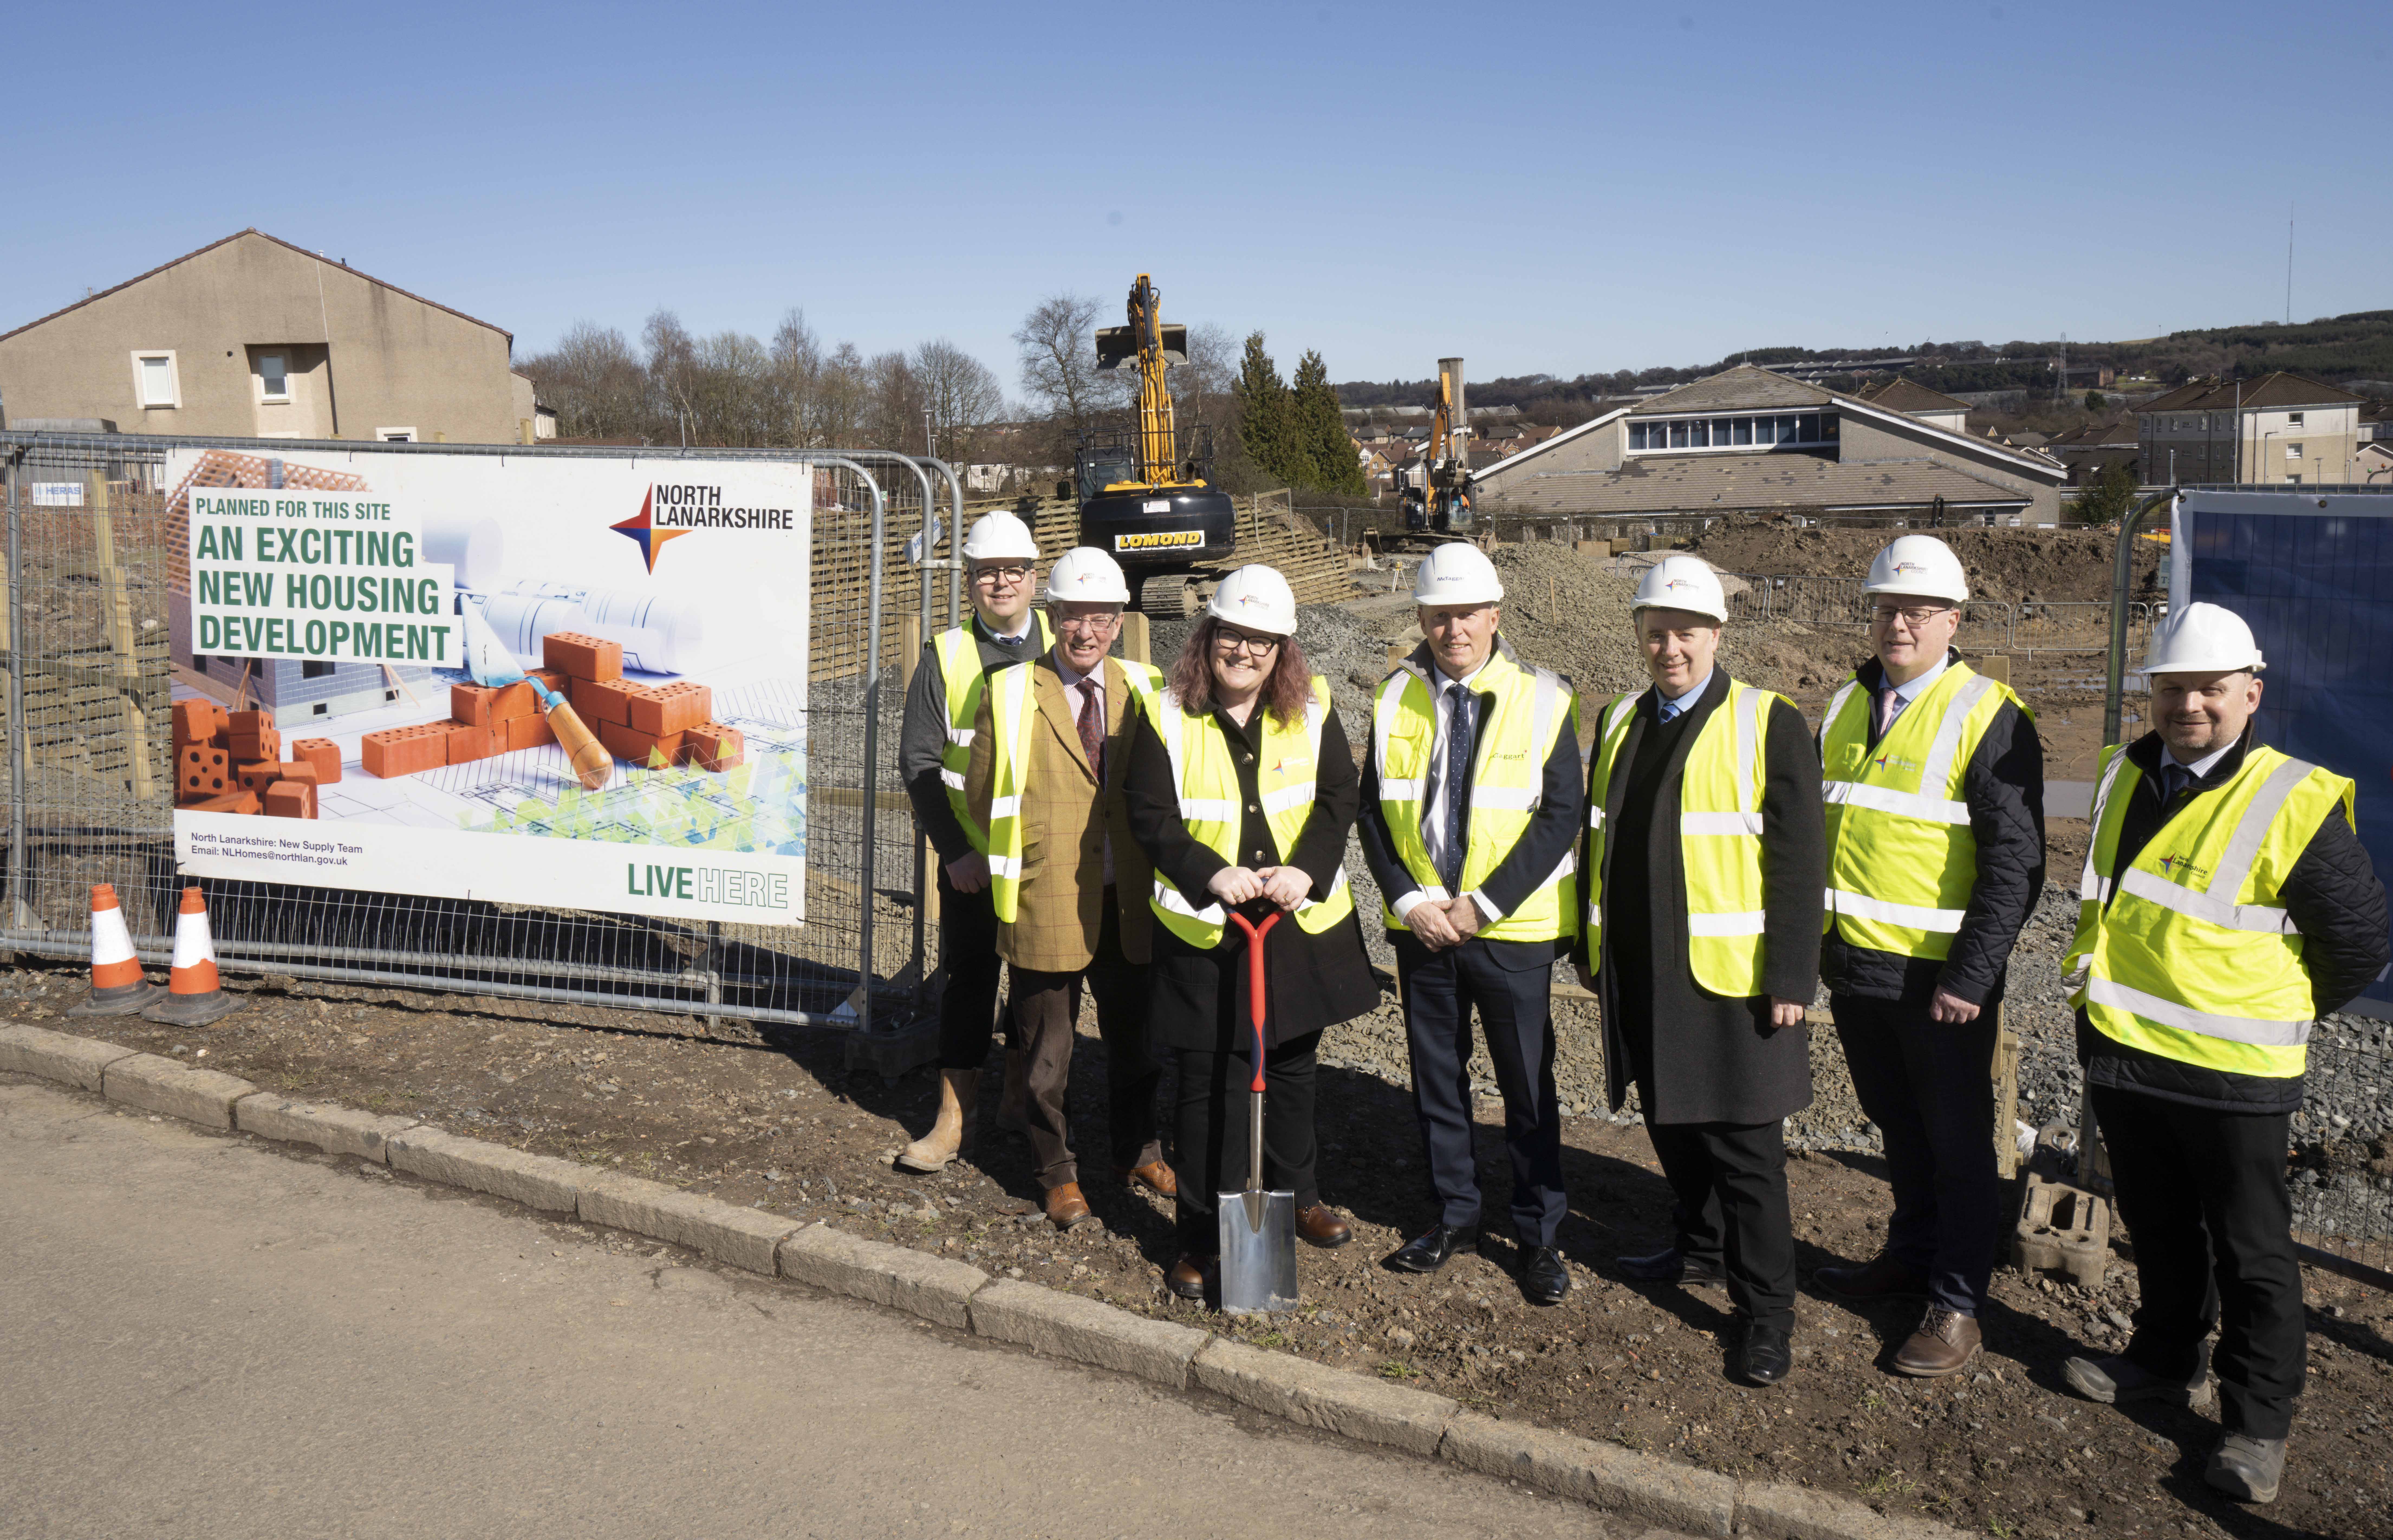 Over 50 new council homes for Airdrie